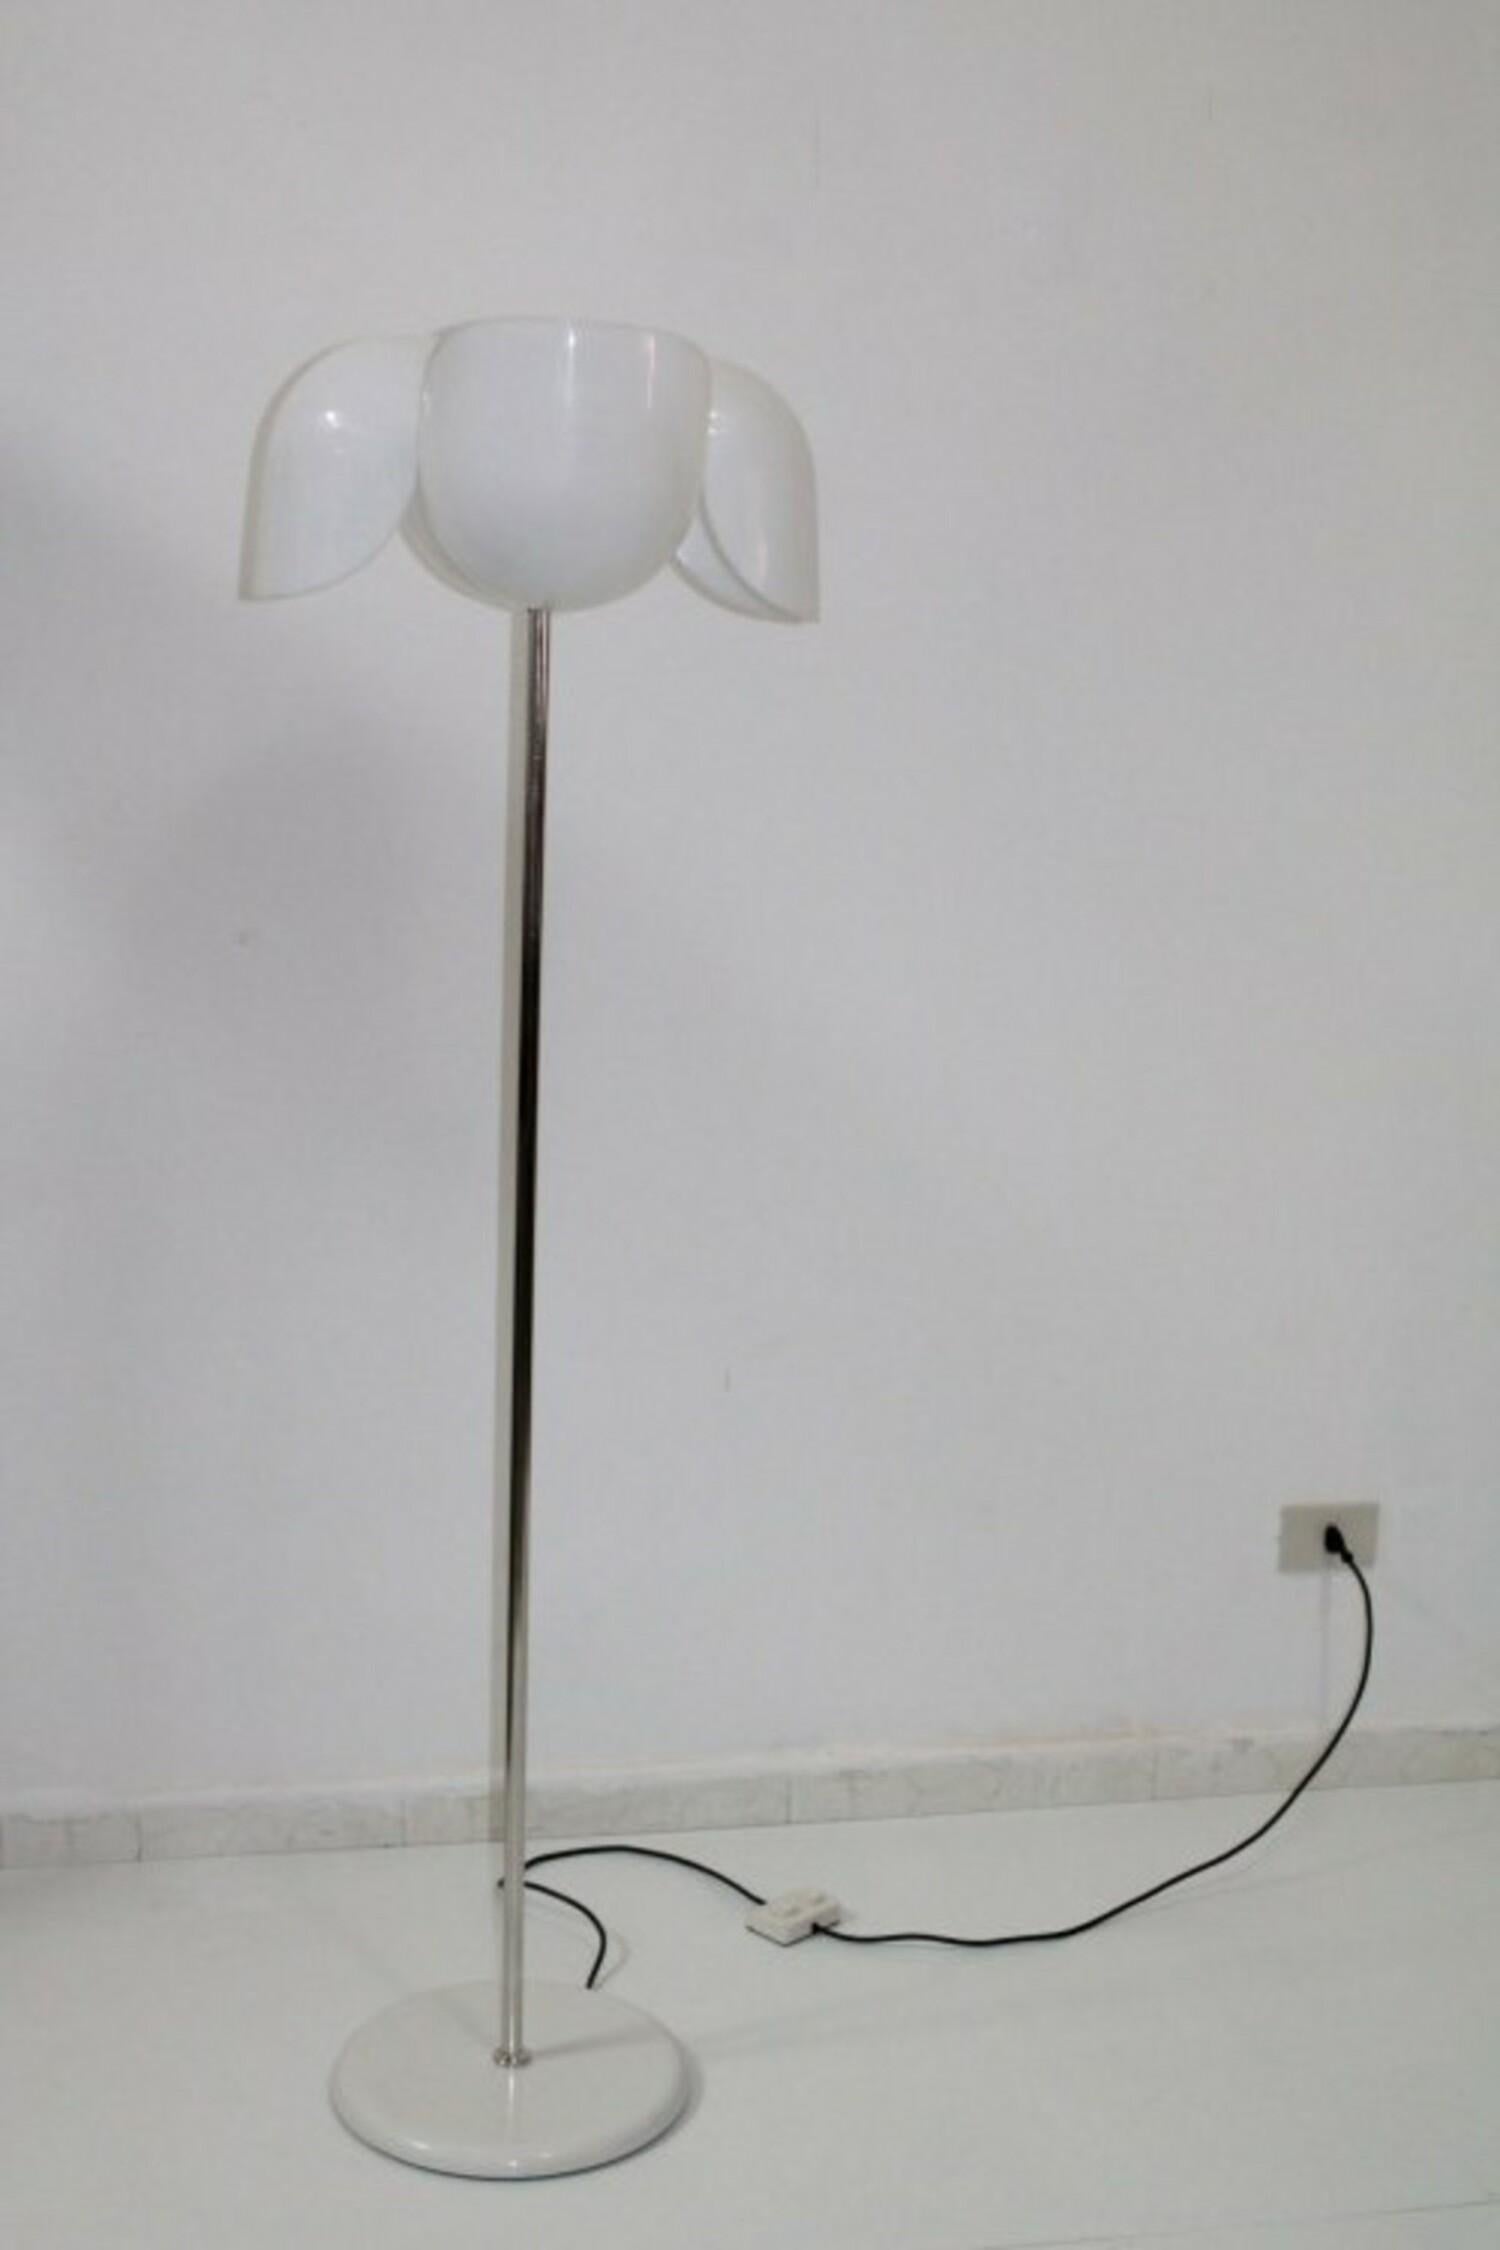 Dafne Floor Lamp by Olaf von Bohr for Valenti Luce, 1970s For Sale 1